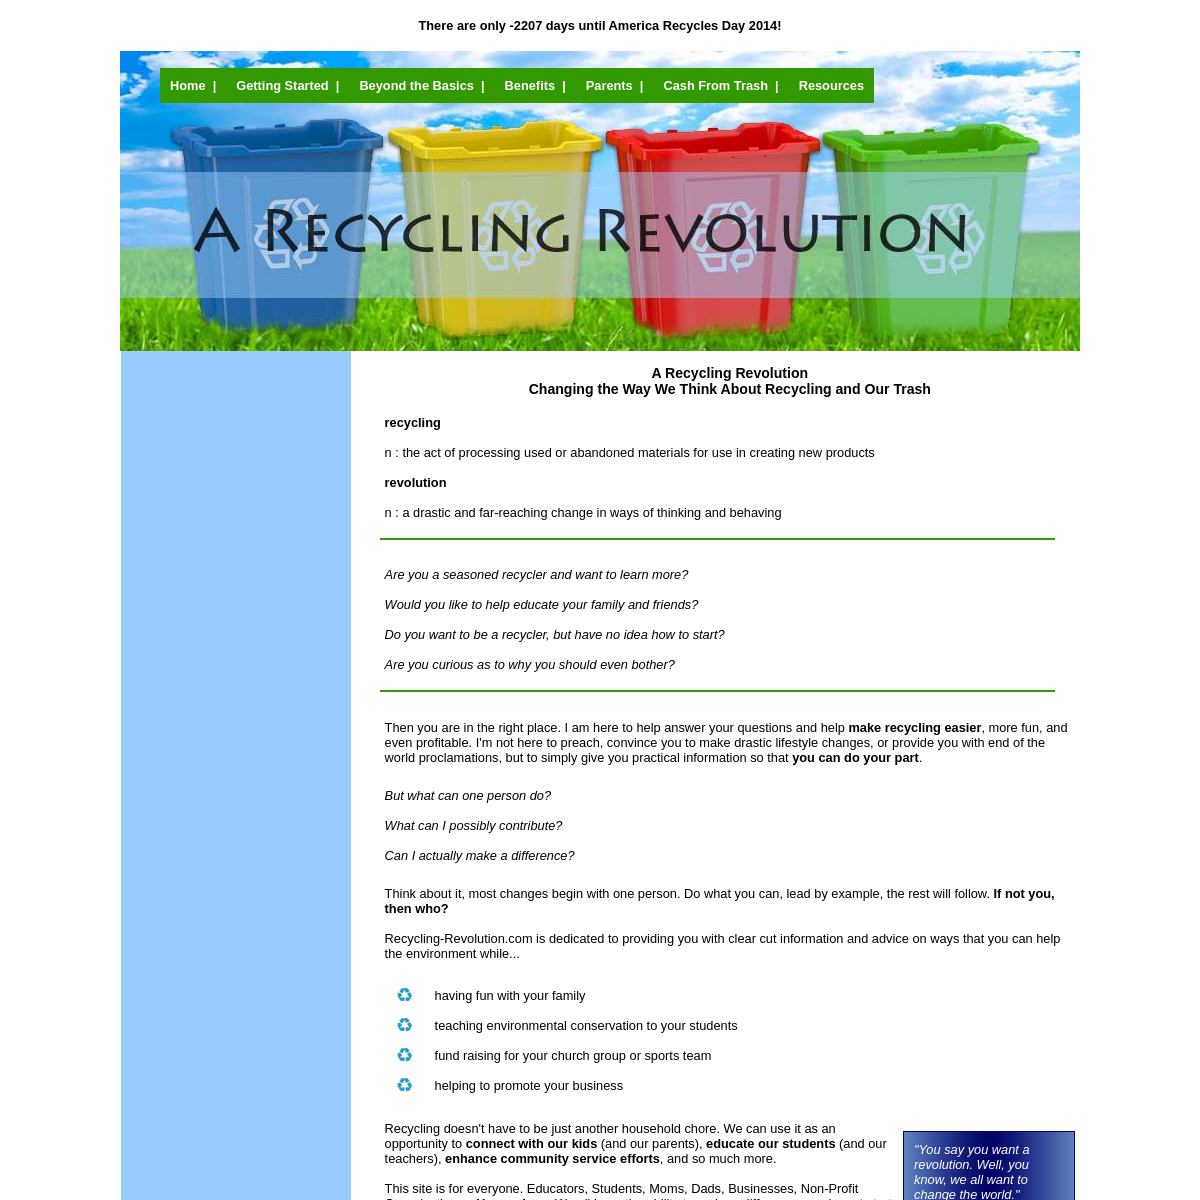 A complete backup of recycling-revolution.com